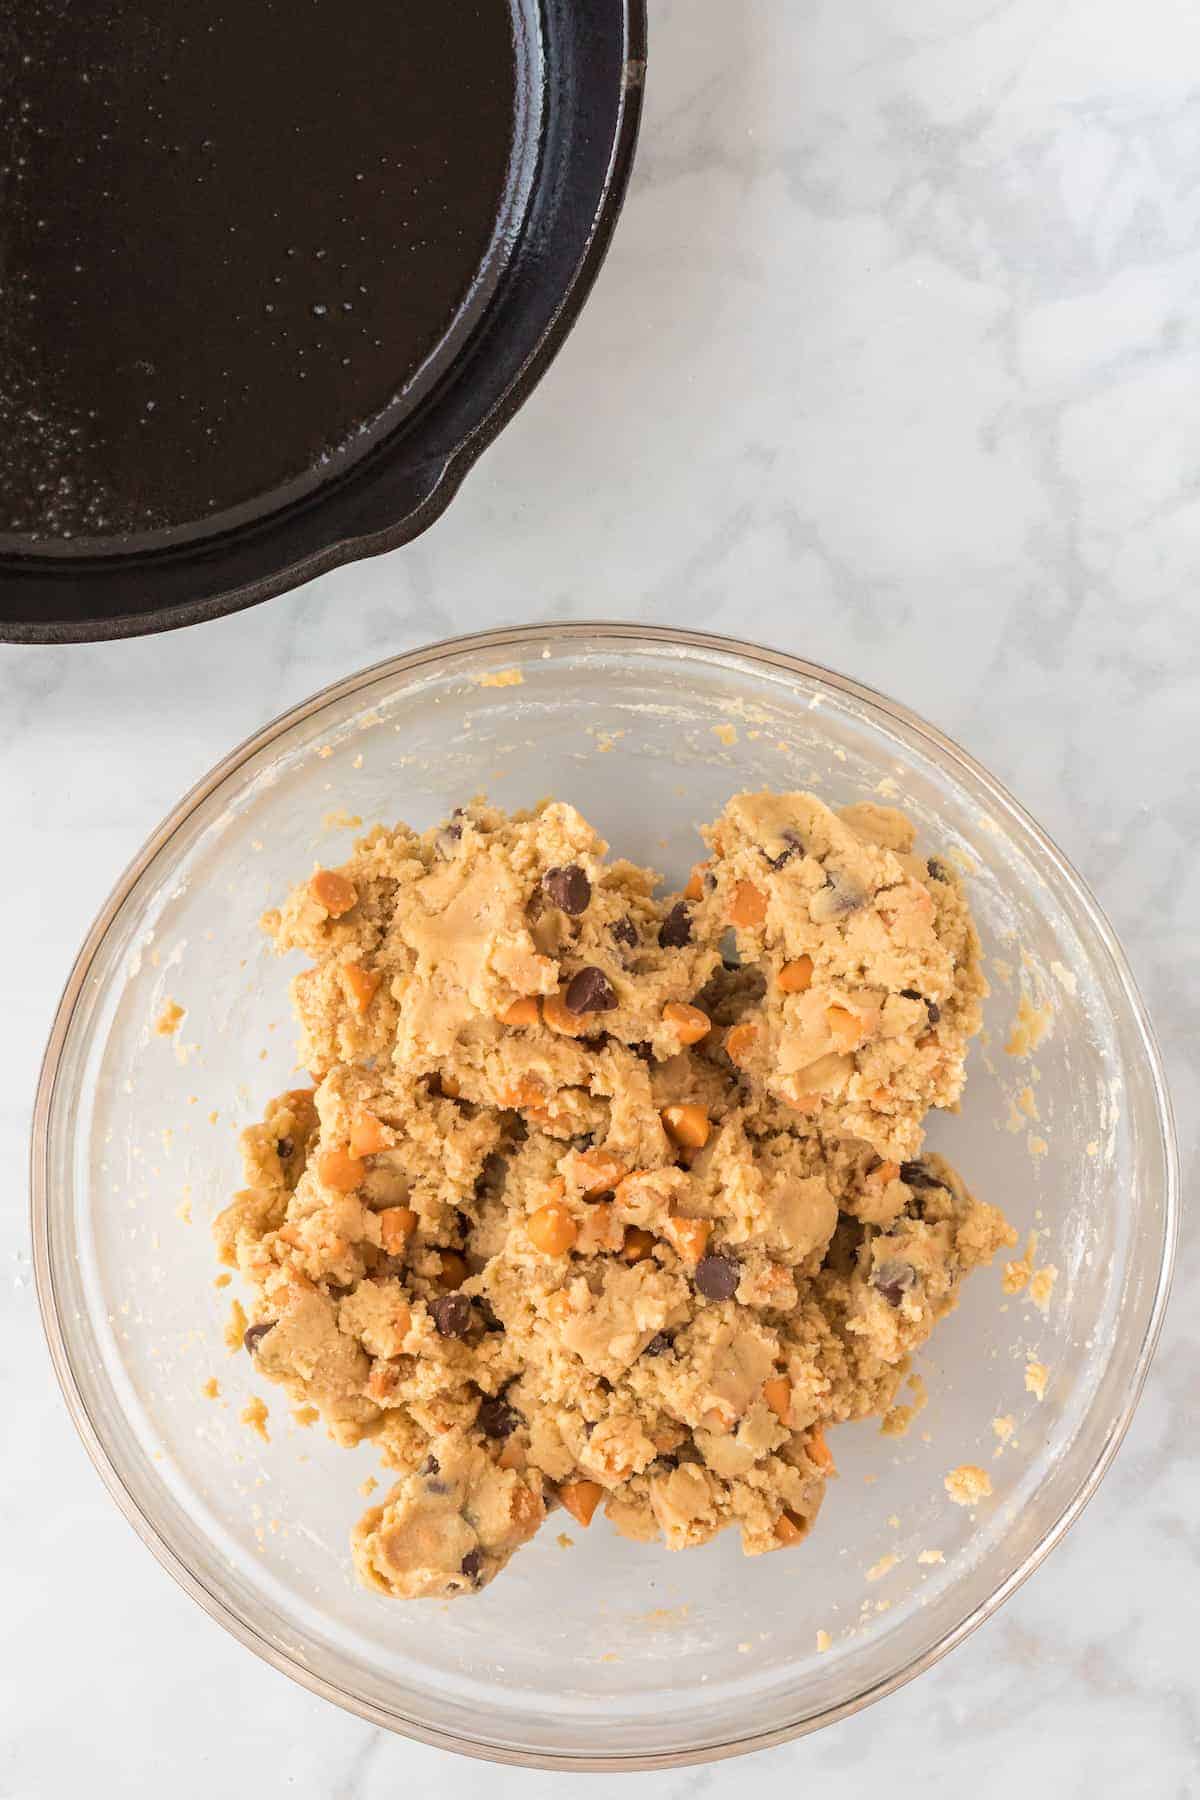 the cookie dough in a large glass bowl with the cast iron skillet in the background